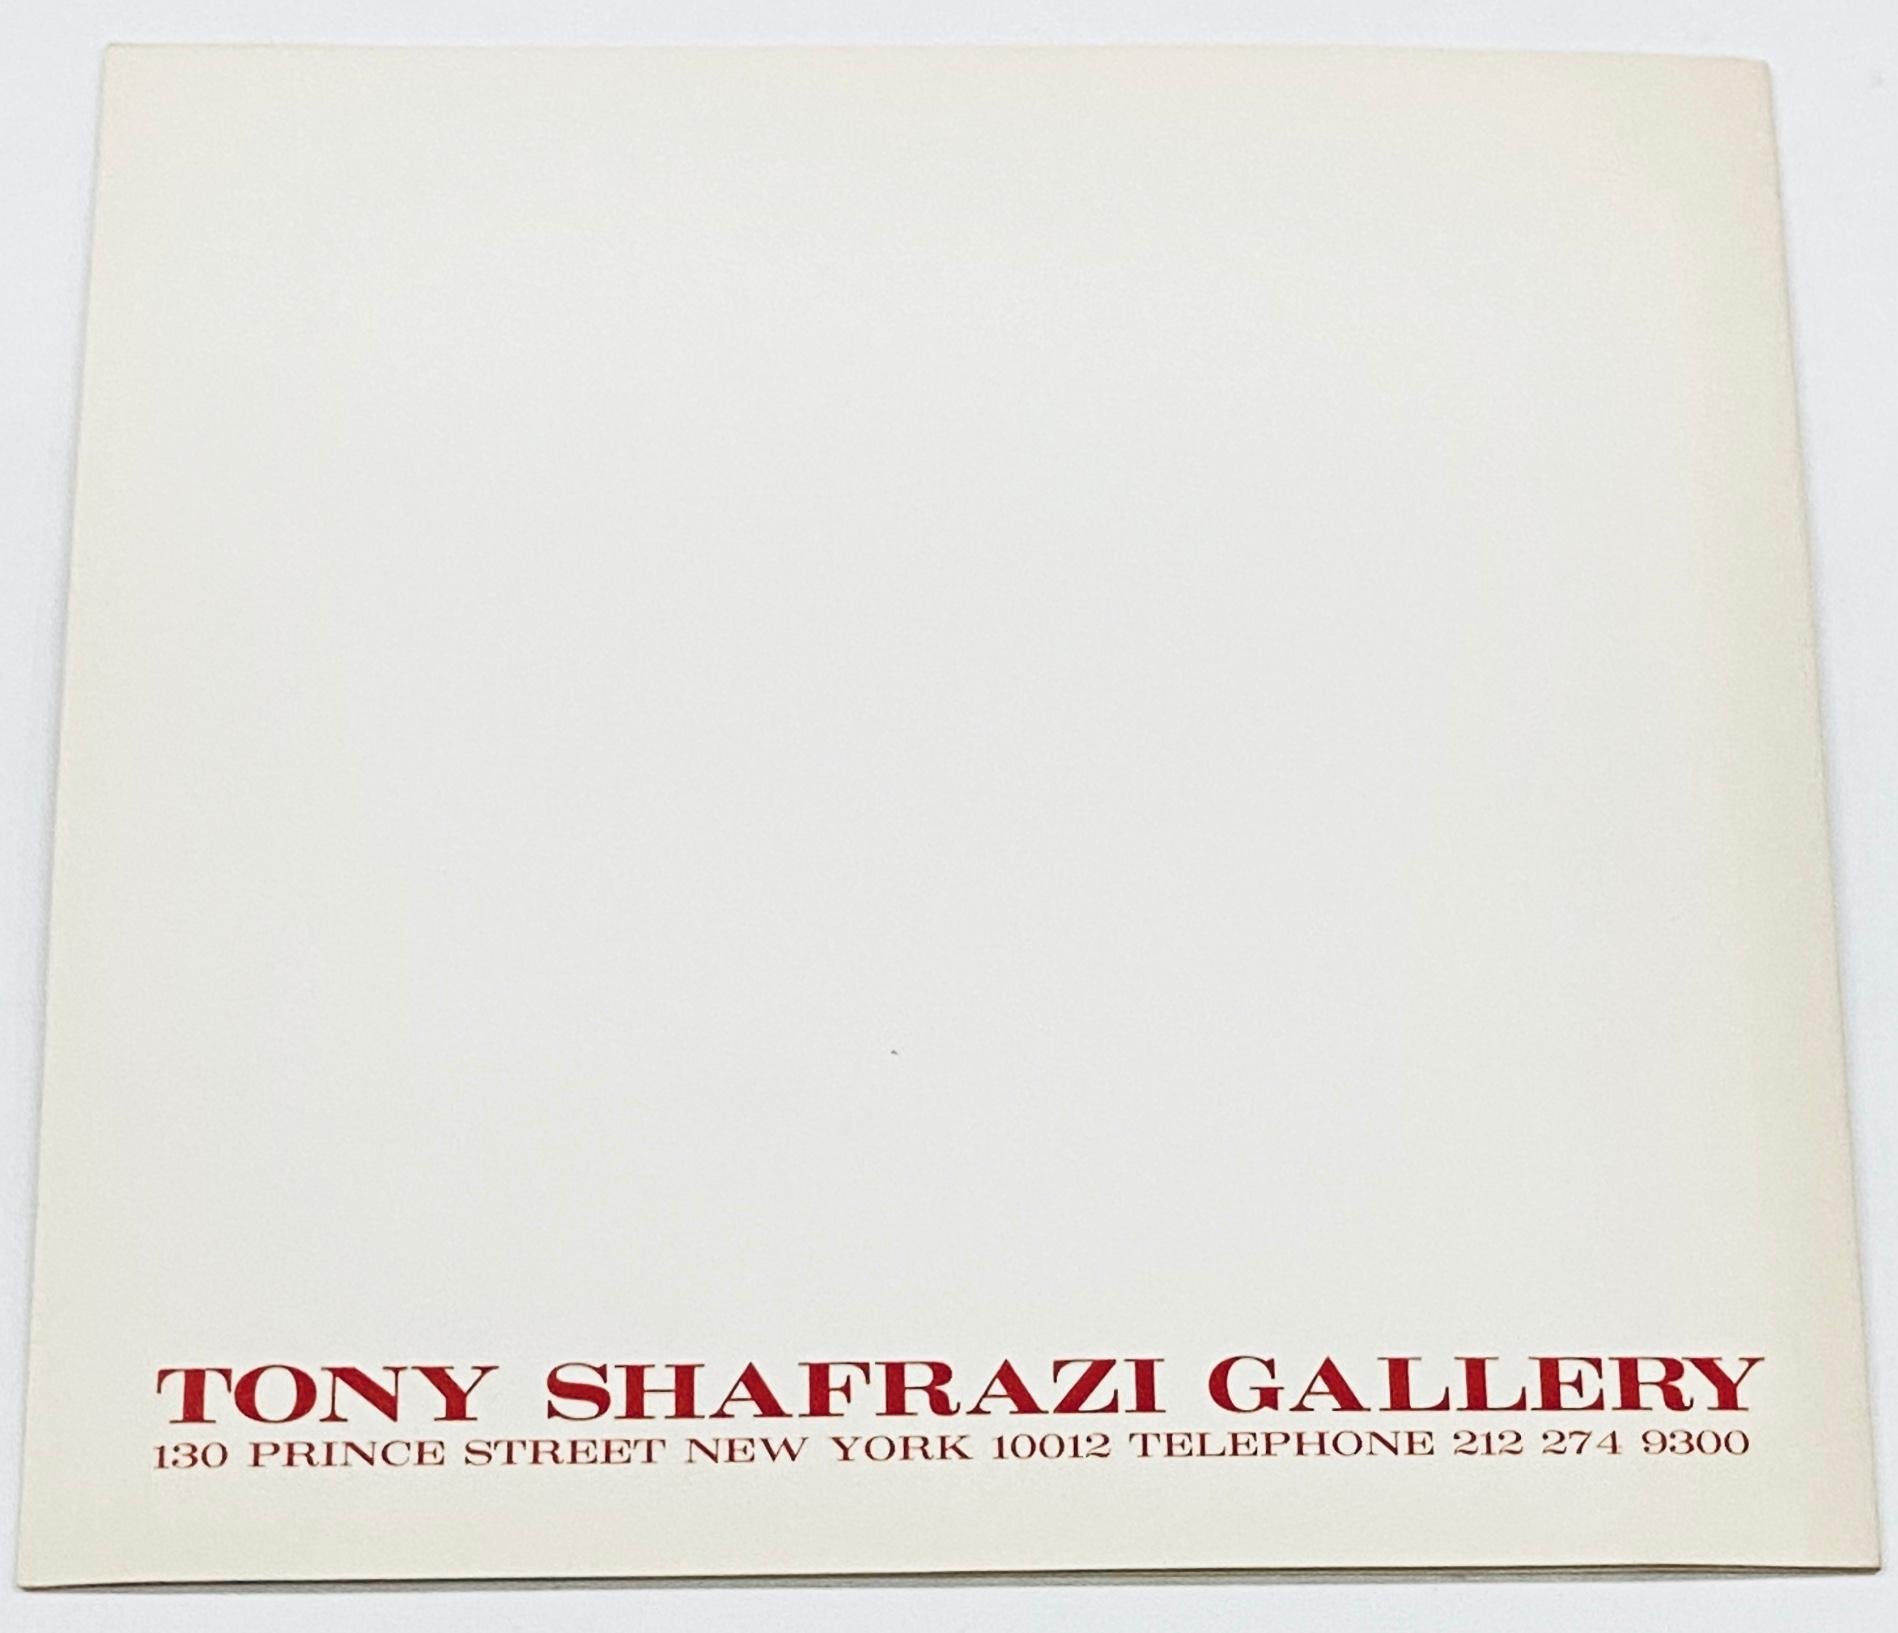 Original invitation to a joint Keith Haring and Jean-Michel Basquiat exhibition entitled, “Paintings”, at Tony Shafrazi Gallery, New York from December 15th, 1990 to January 26th, 1991. Interior features Basquiat's 